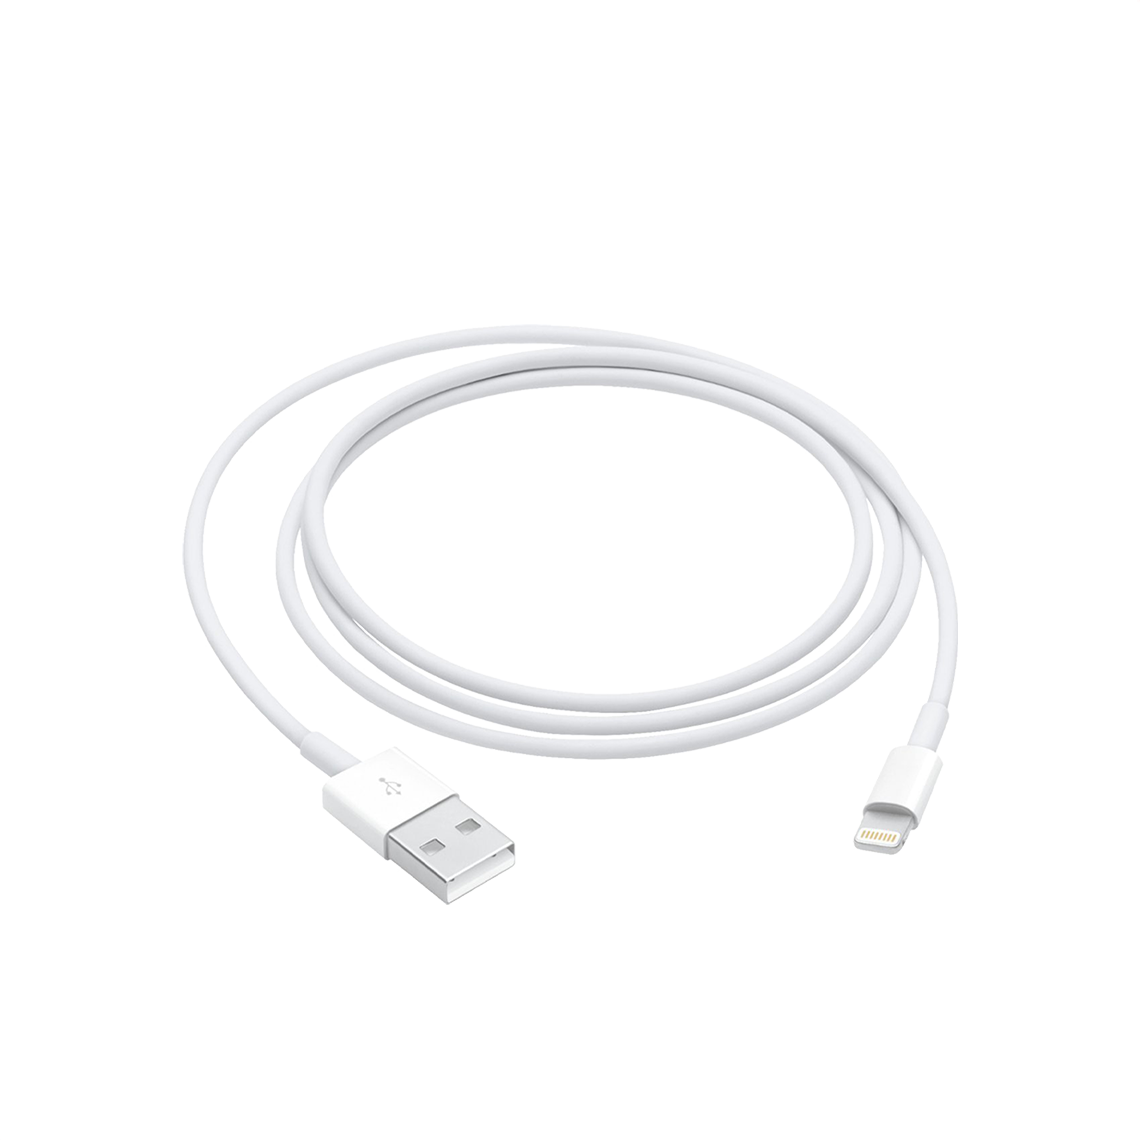 Lightning to USB Cable (1 Meter)